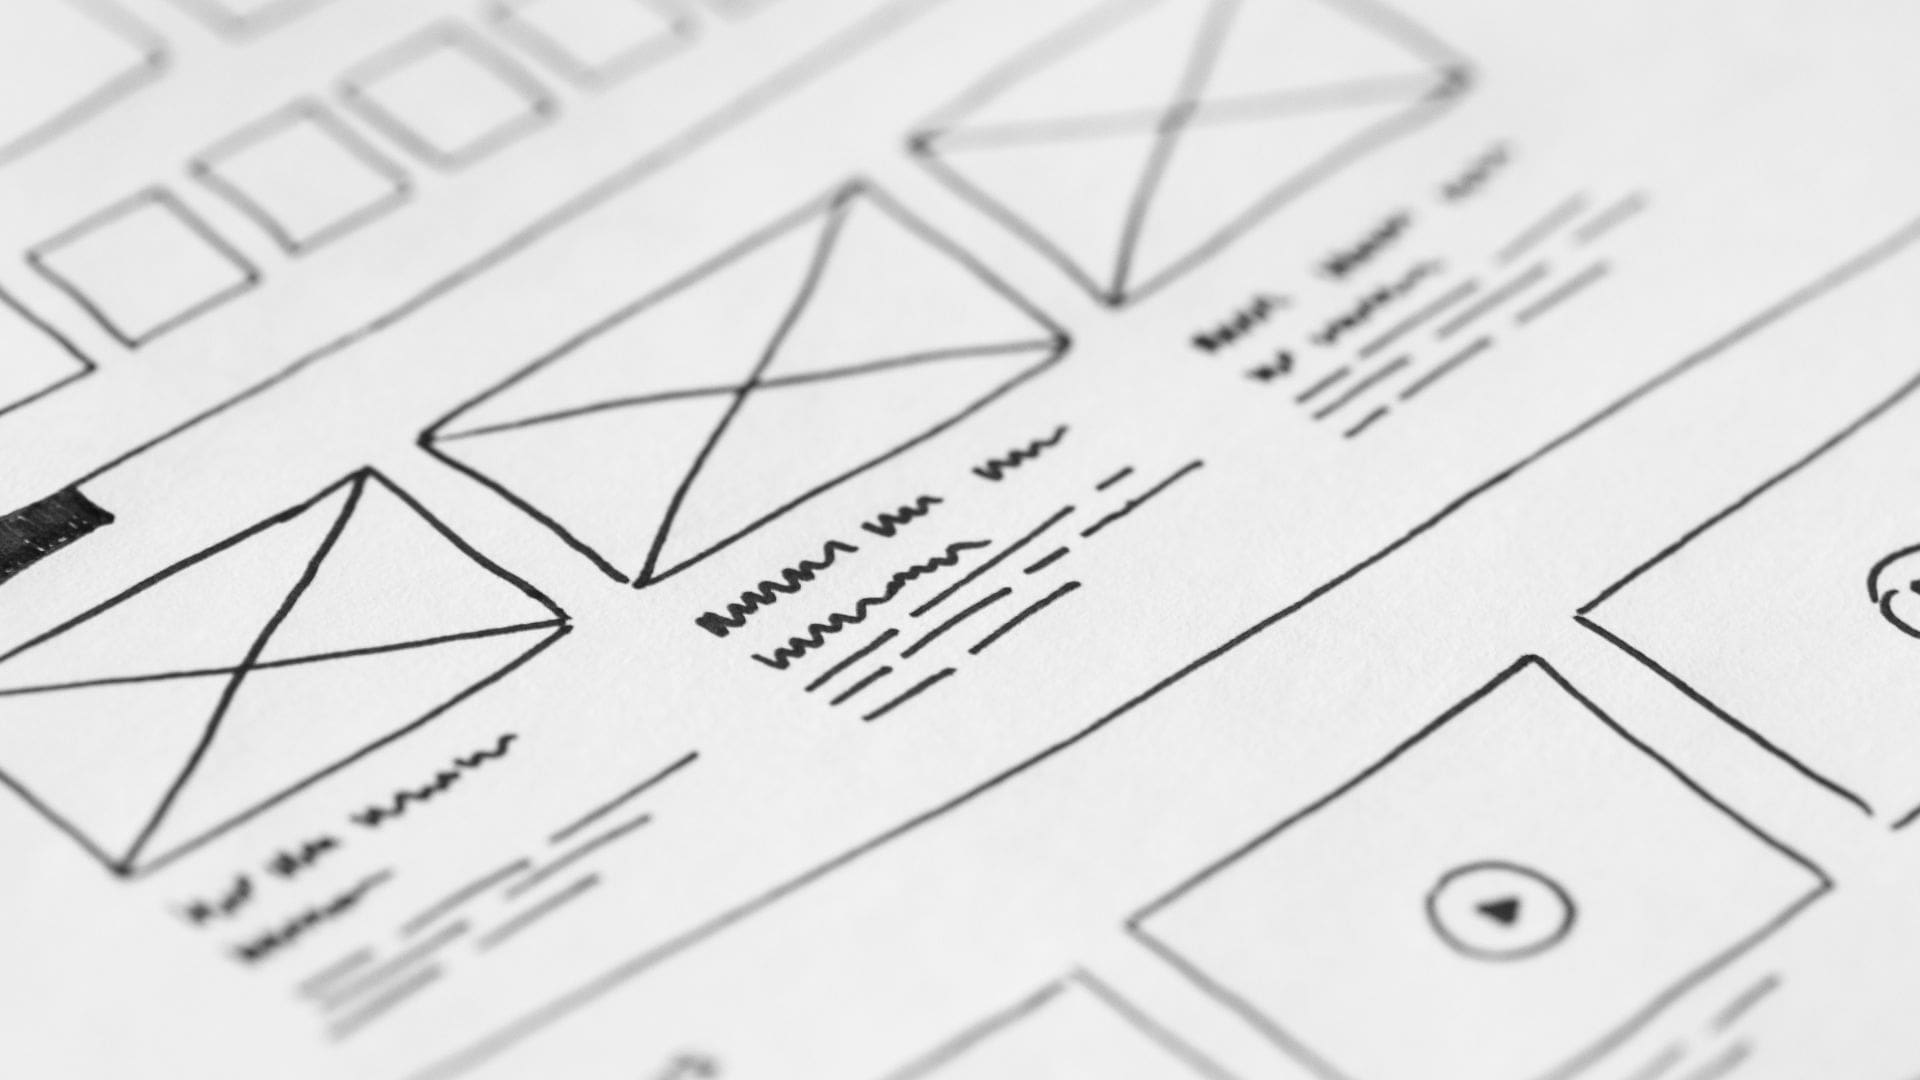 Hand drawn website wireframe, low-fidelity sketches in black pen.